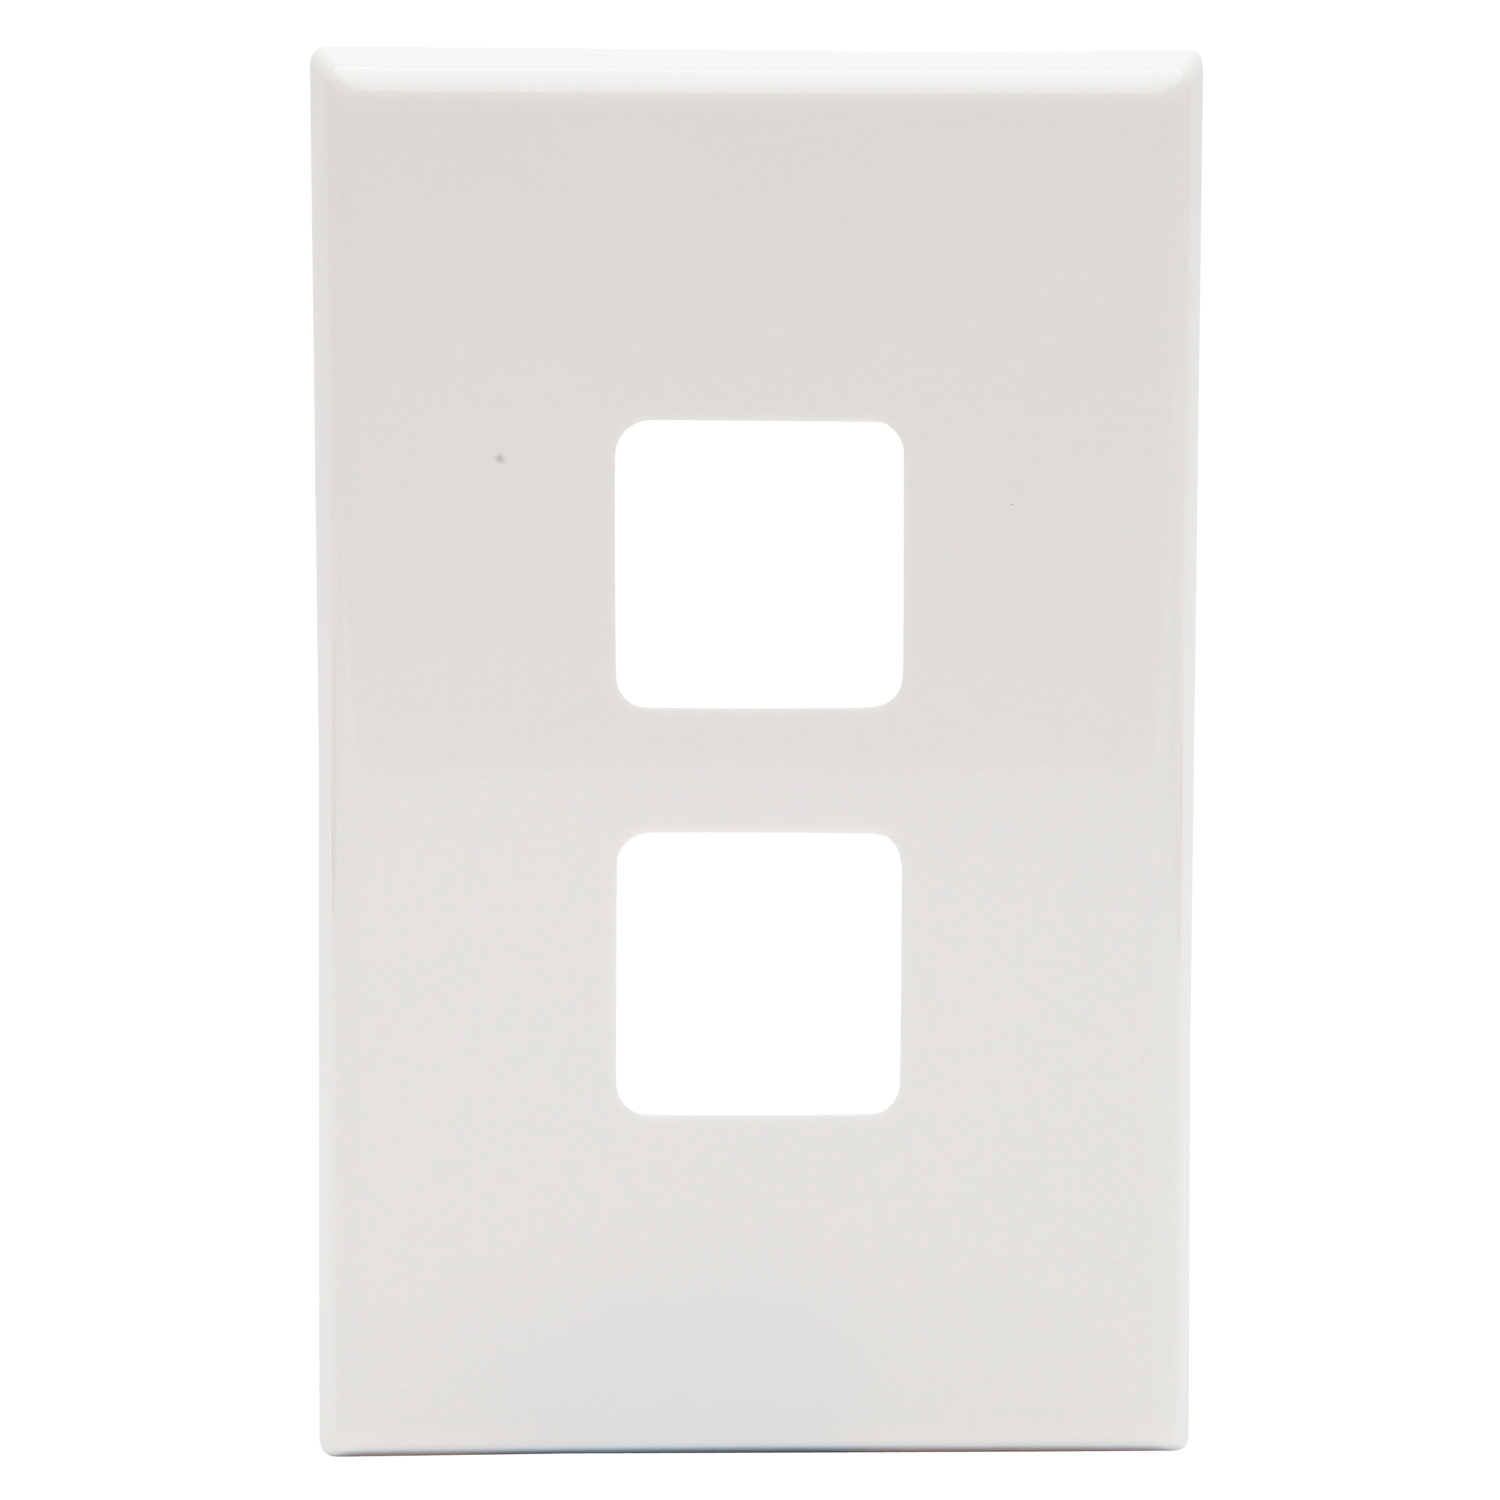 PDL 600 Series - Cover Plate Switch 2-Gang - White